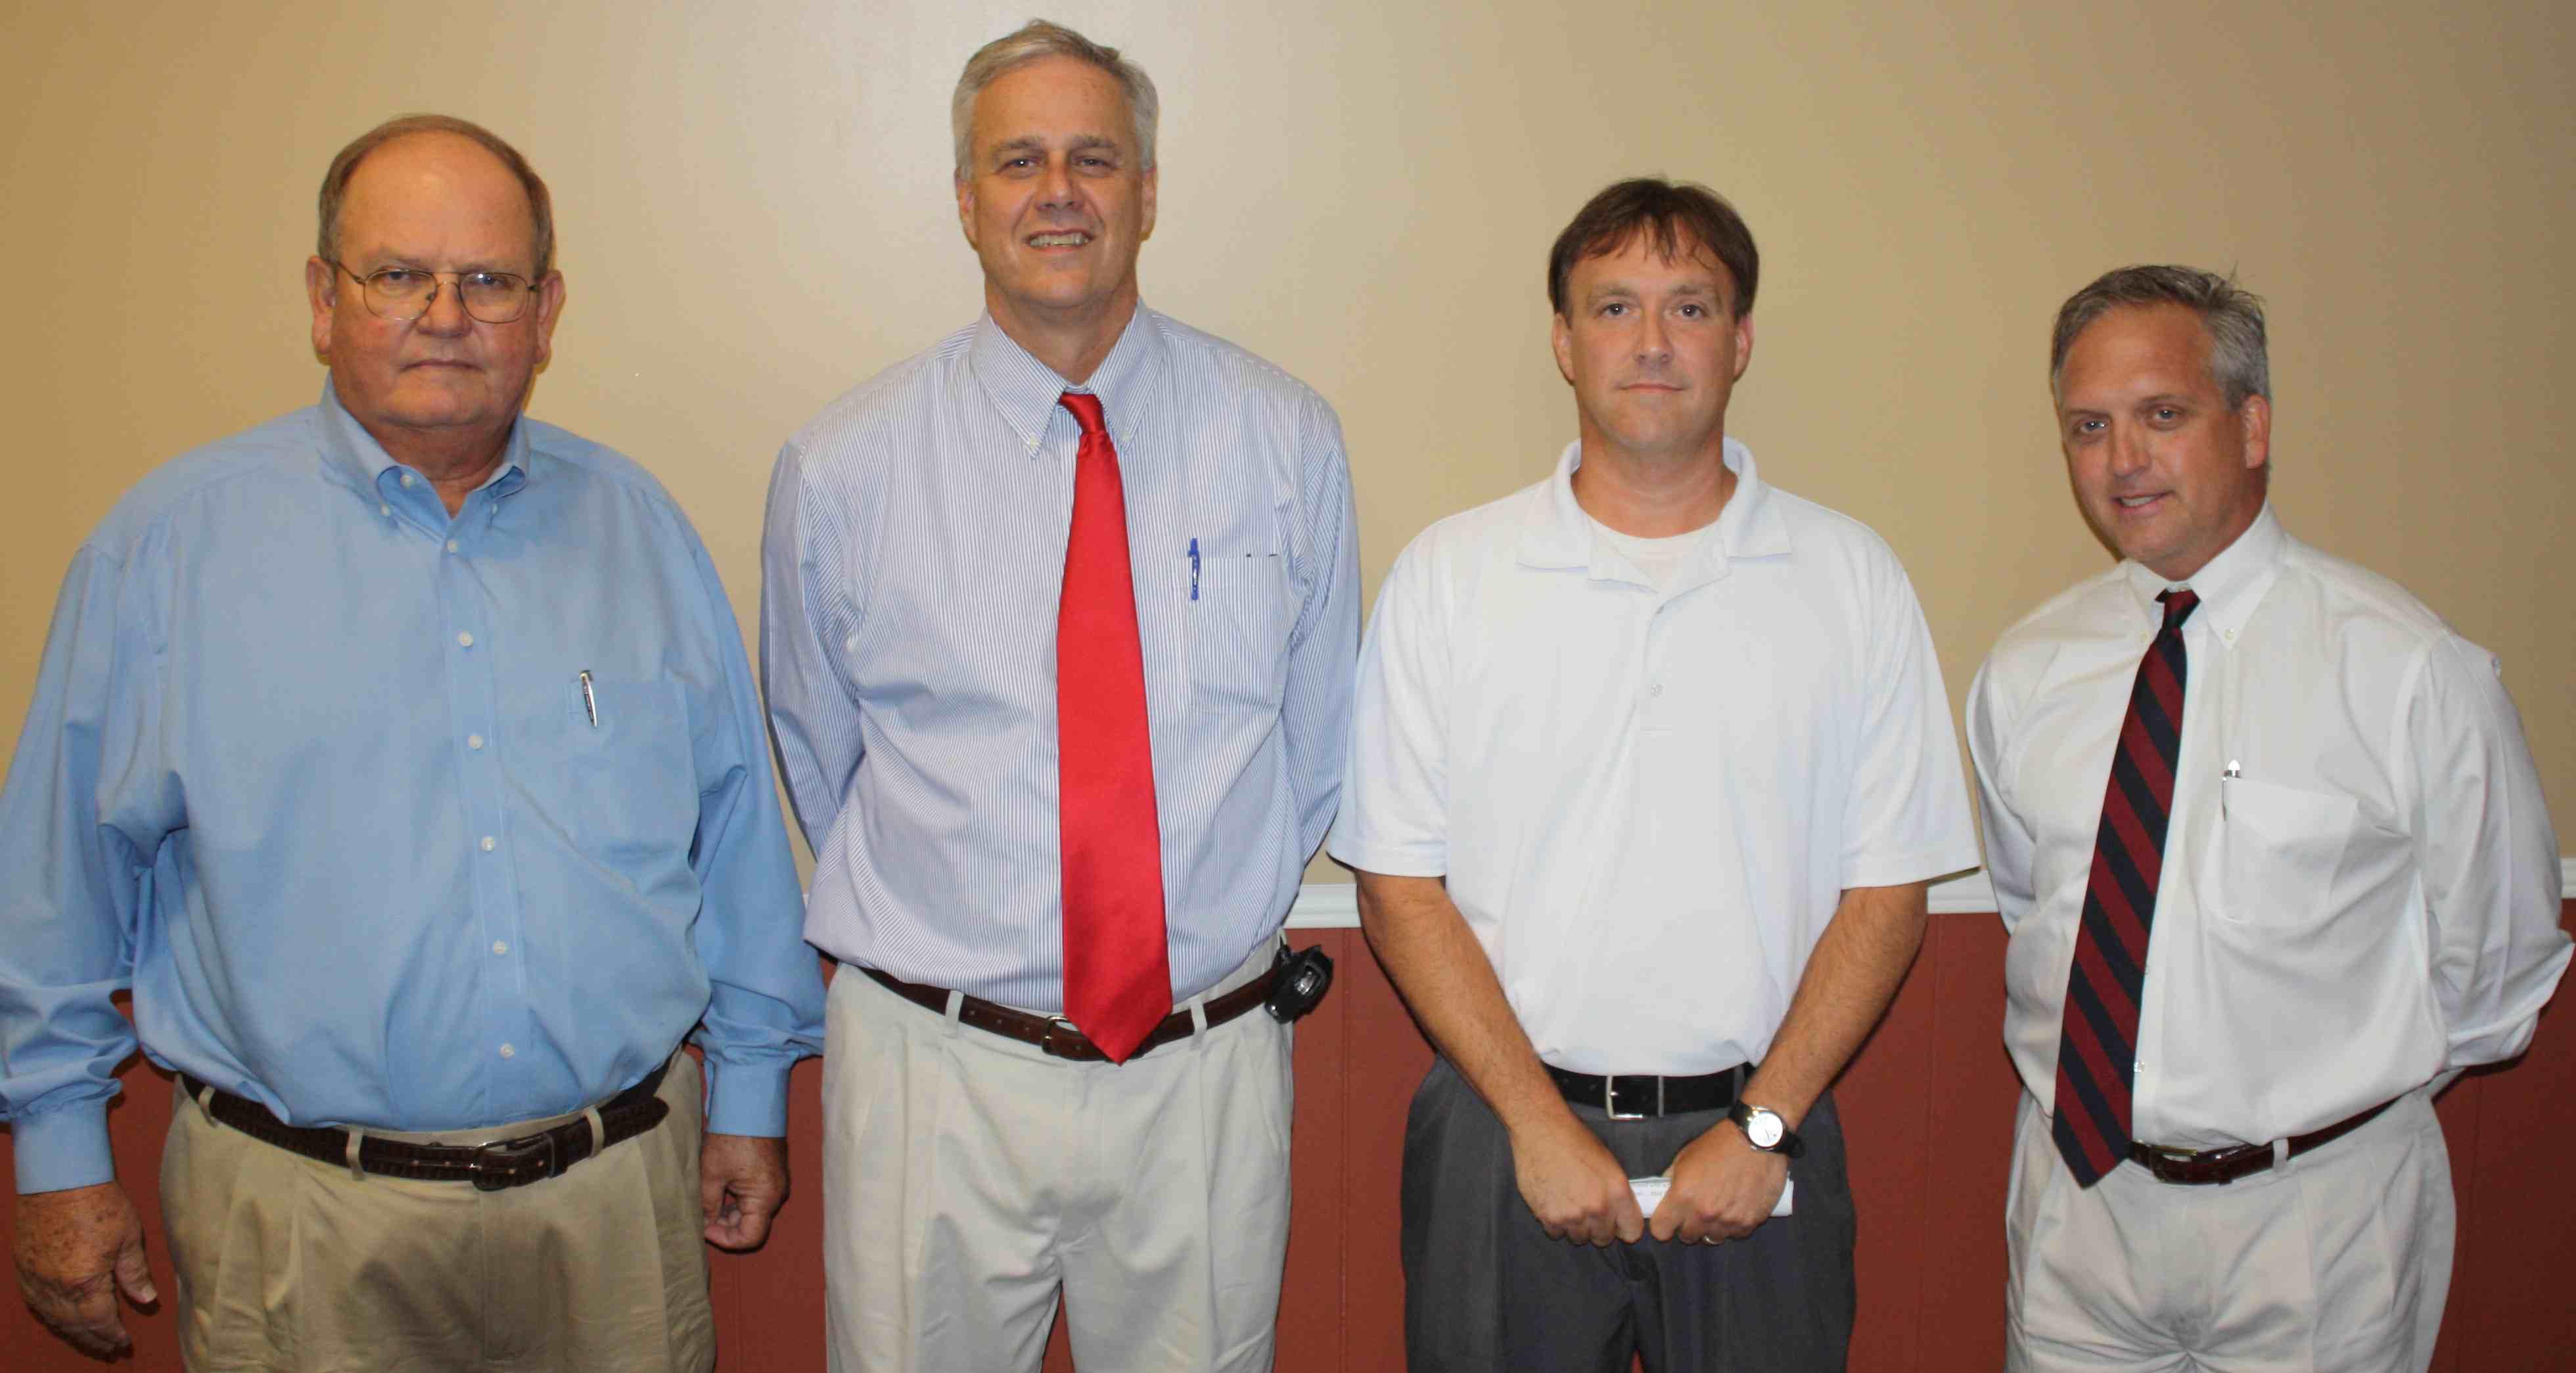 Candidates in the Haleyville Board of Education